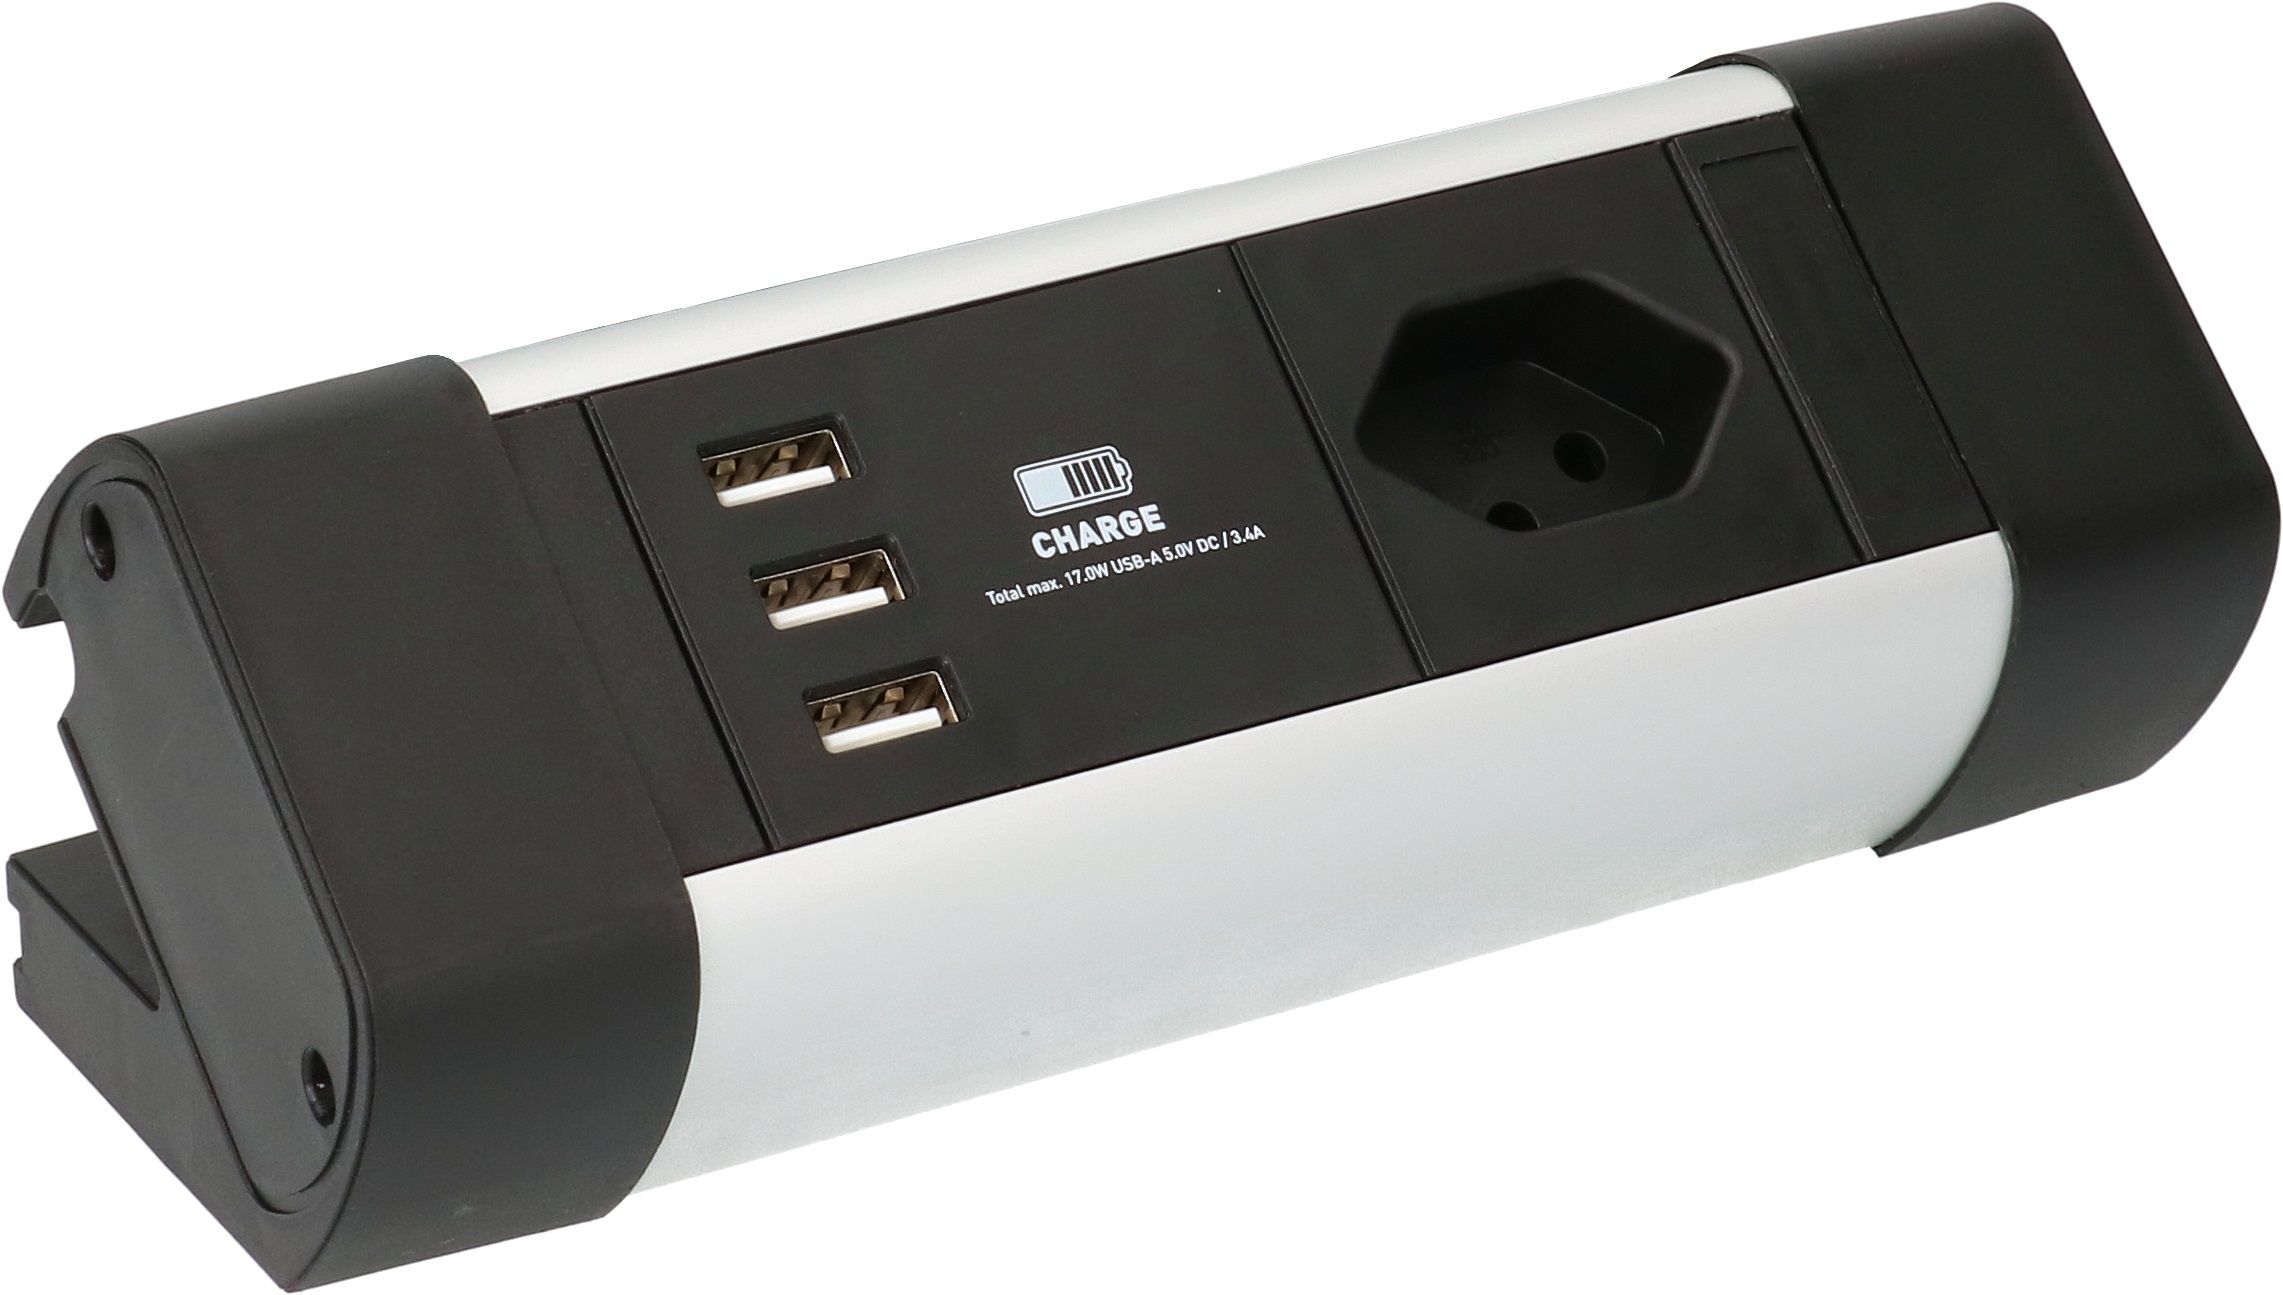 multiprise Office Line 1x type 13 3x USB type A 5V/3.4A